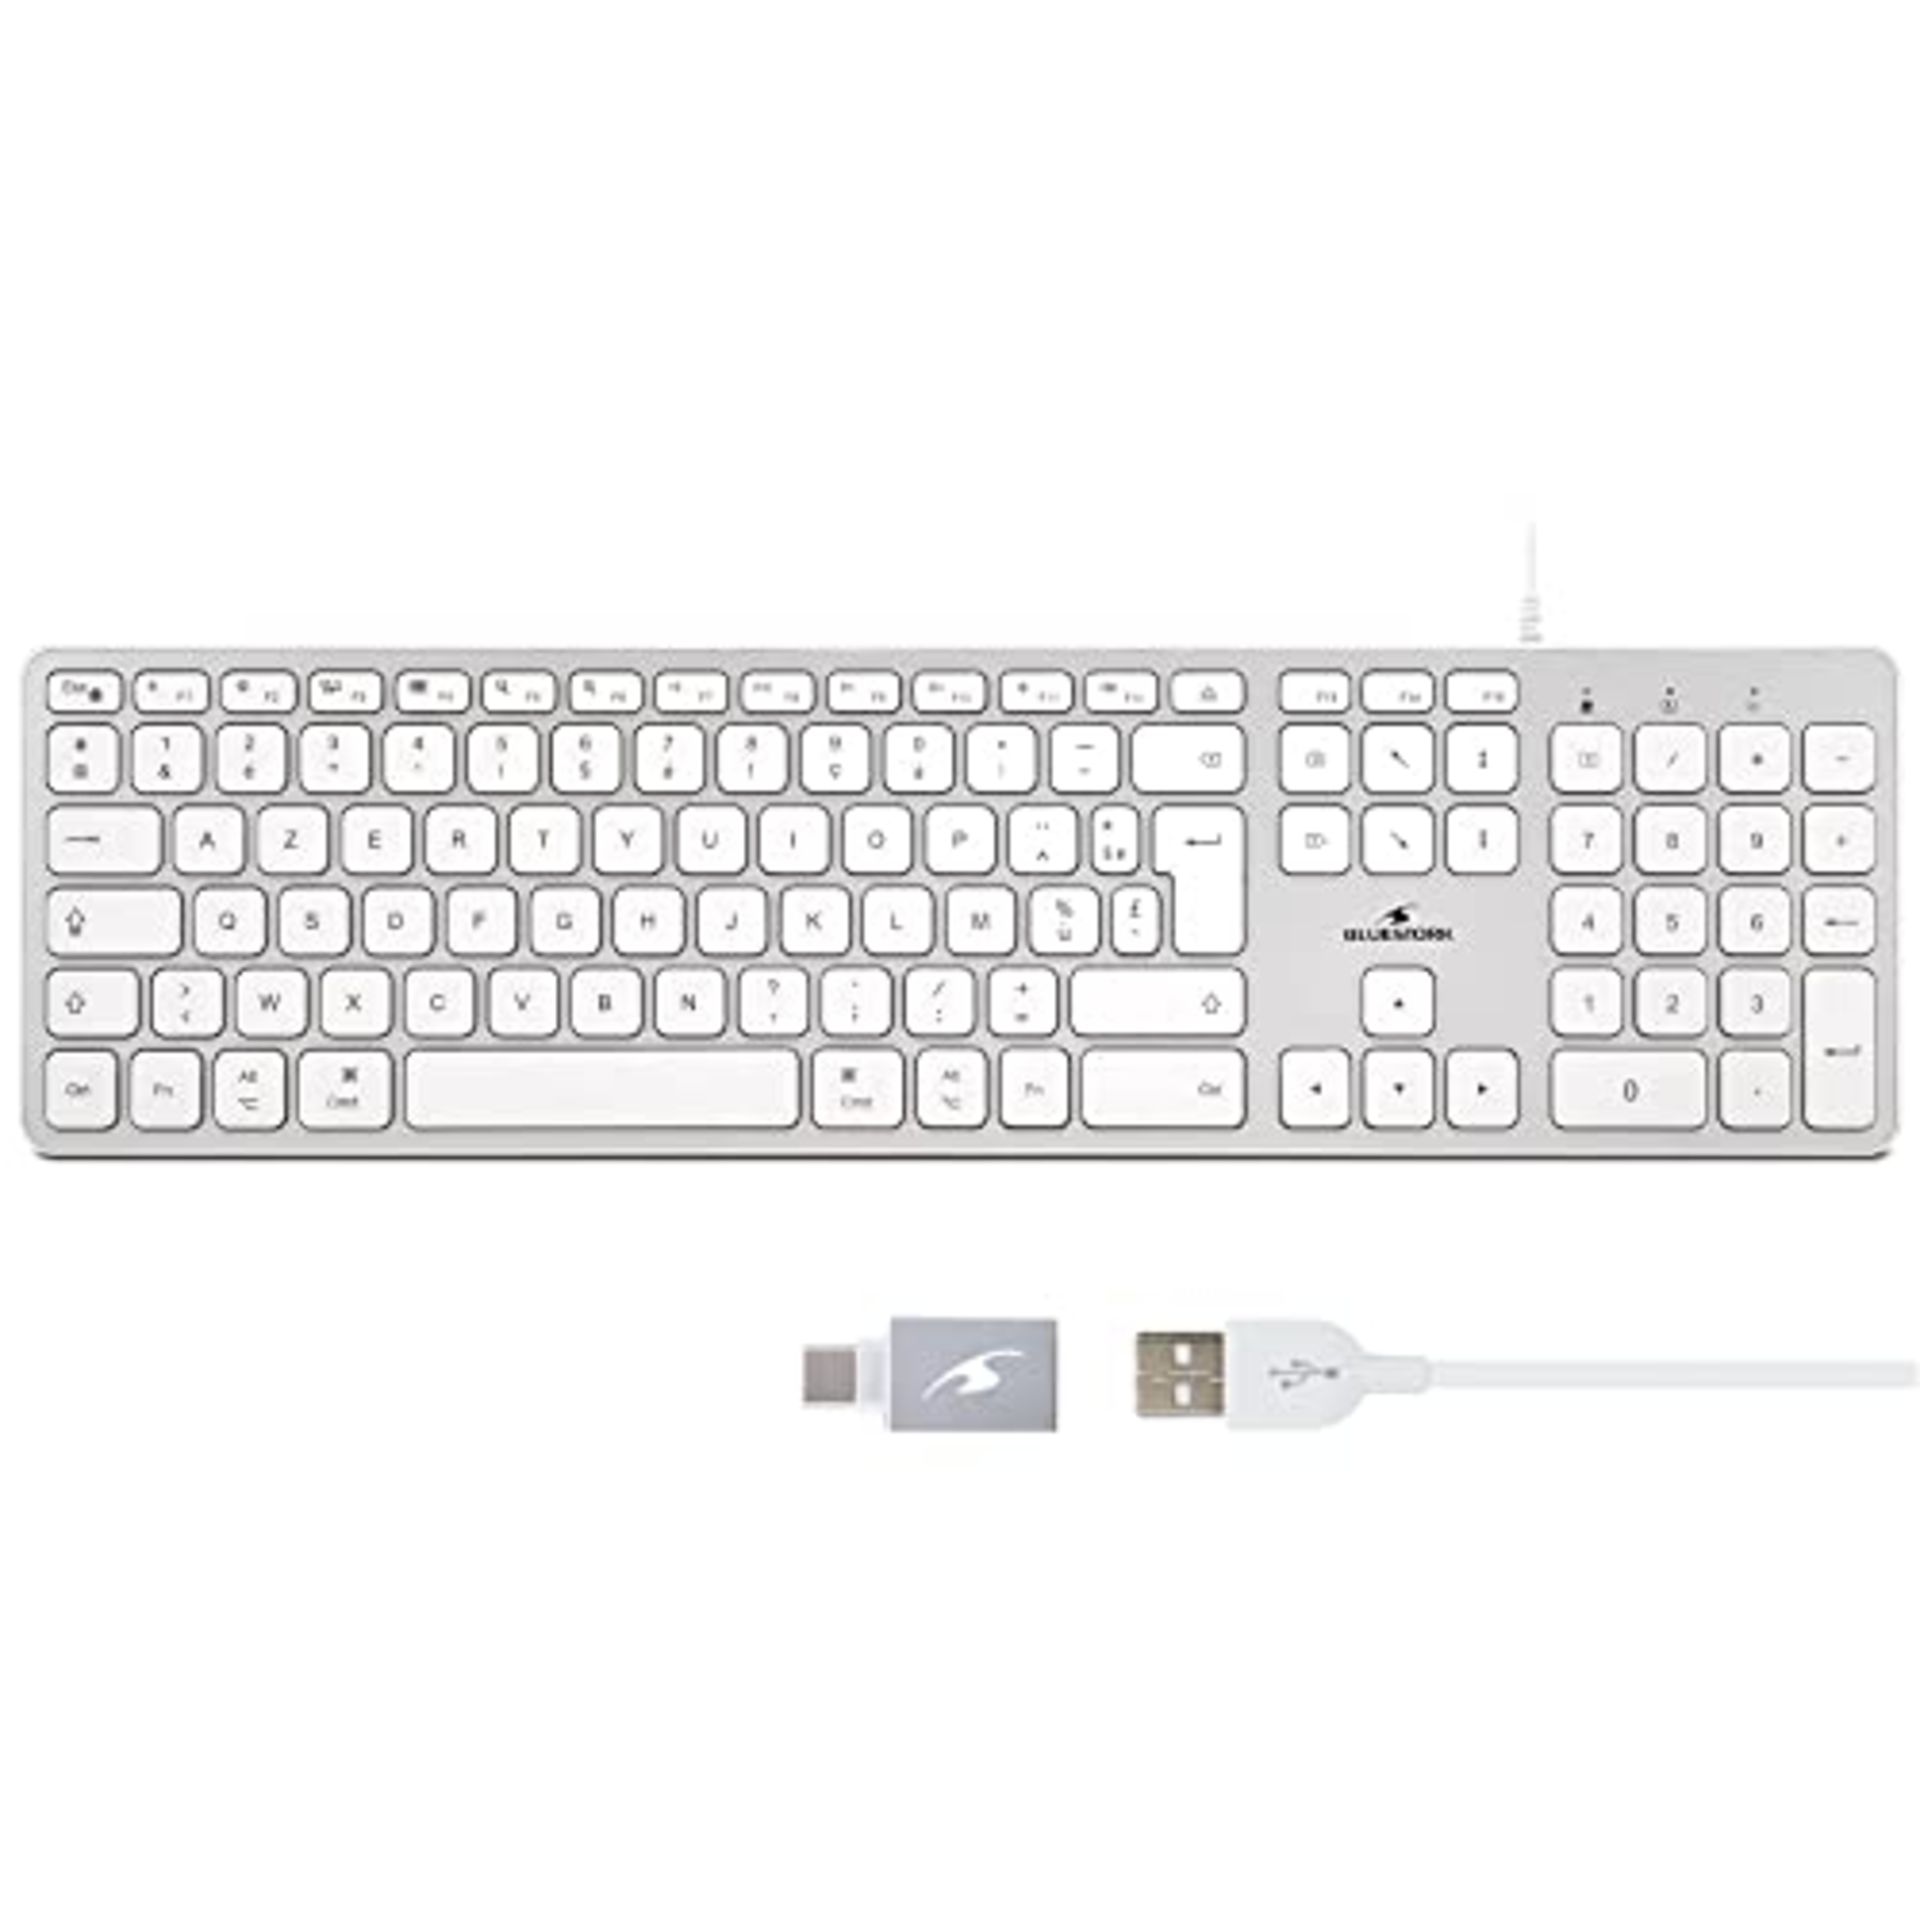 Bluestork French AZERTY Wired Keyboard for Mac - Concave and Silent Keys, 13 Multimedi